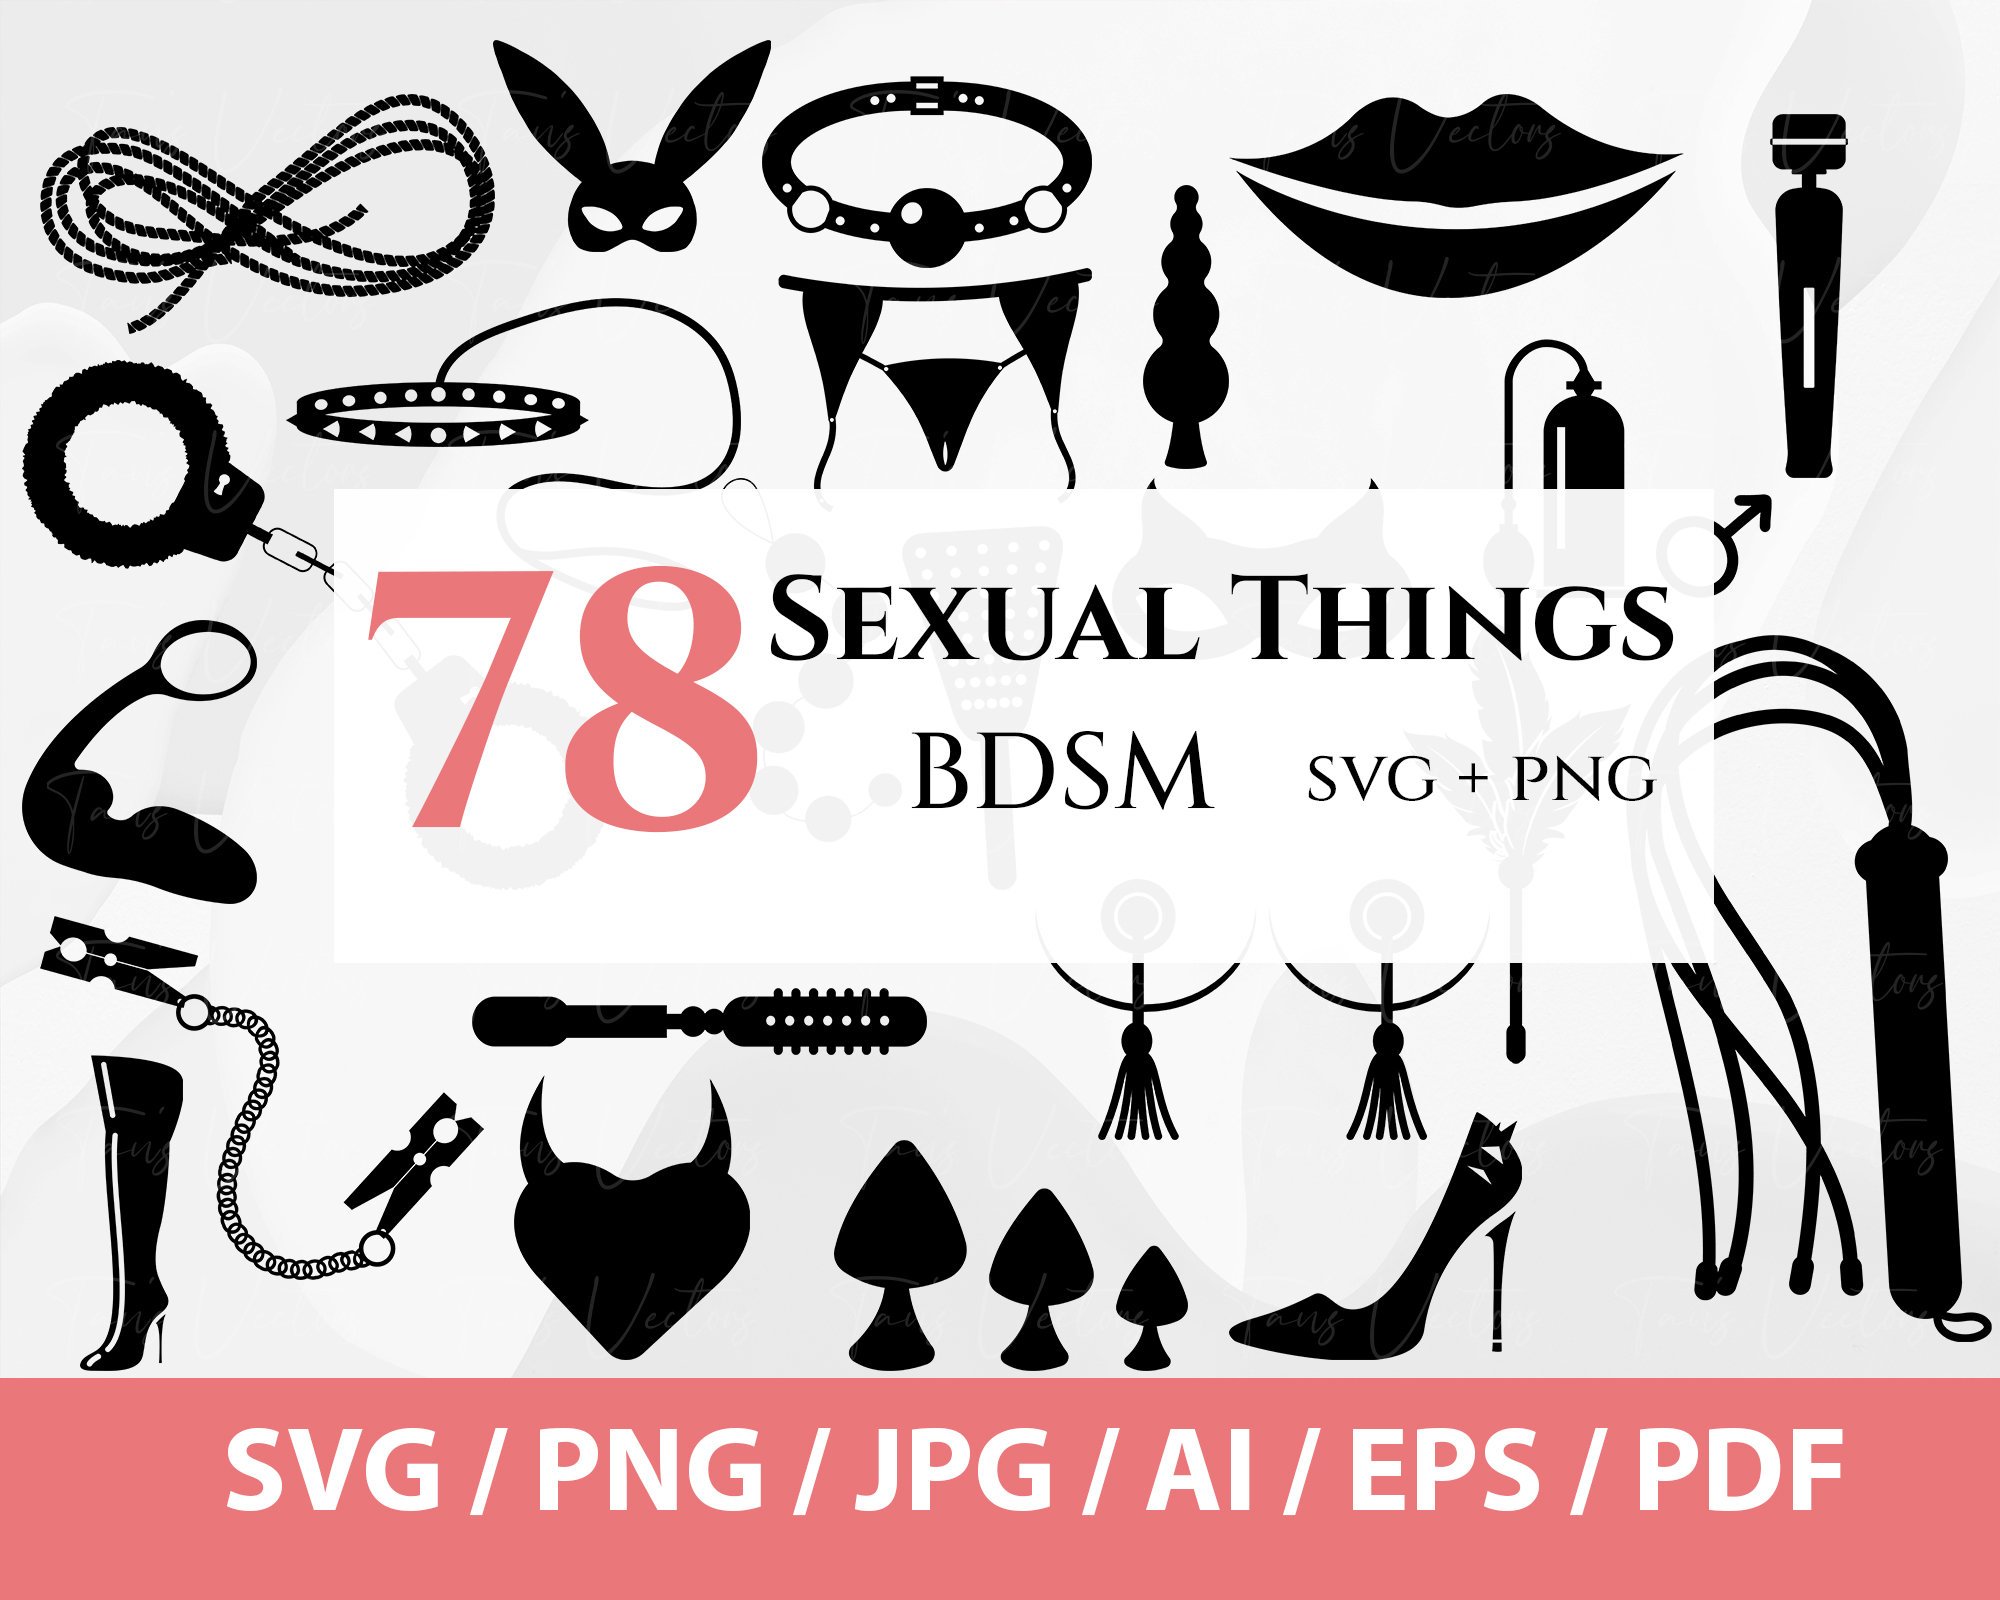 78 Sexual Things BDSM Svg Adult Sex Toys Svg Handcuffs picture